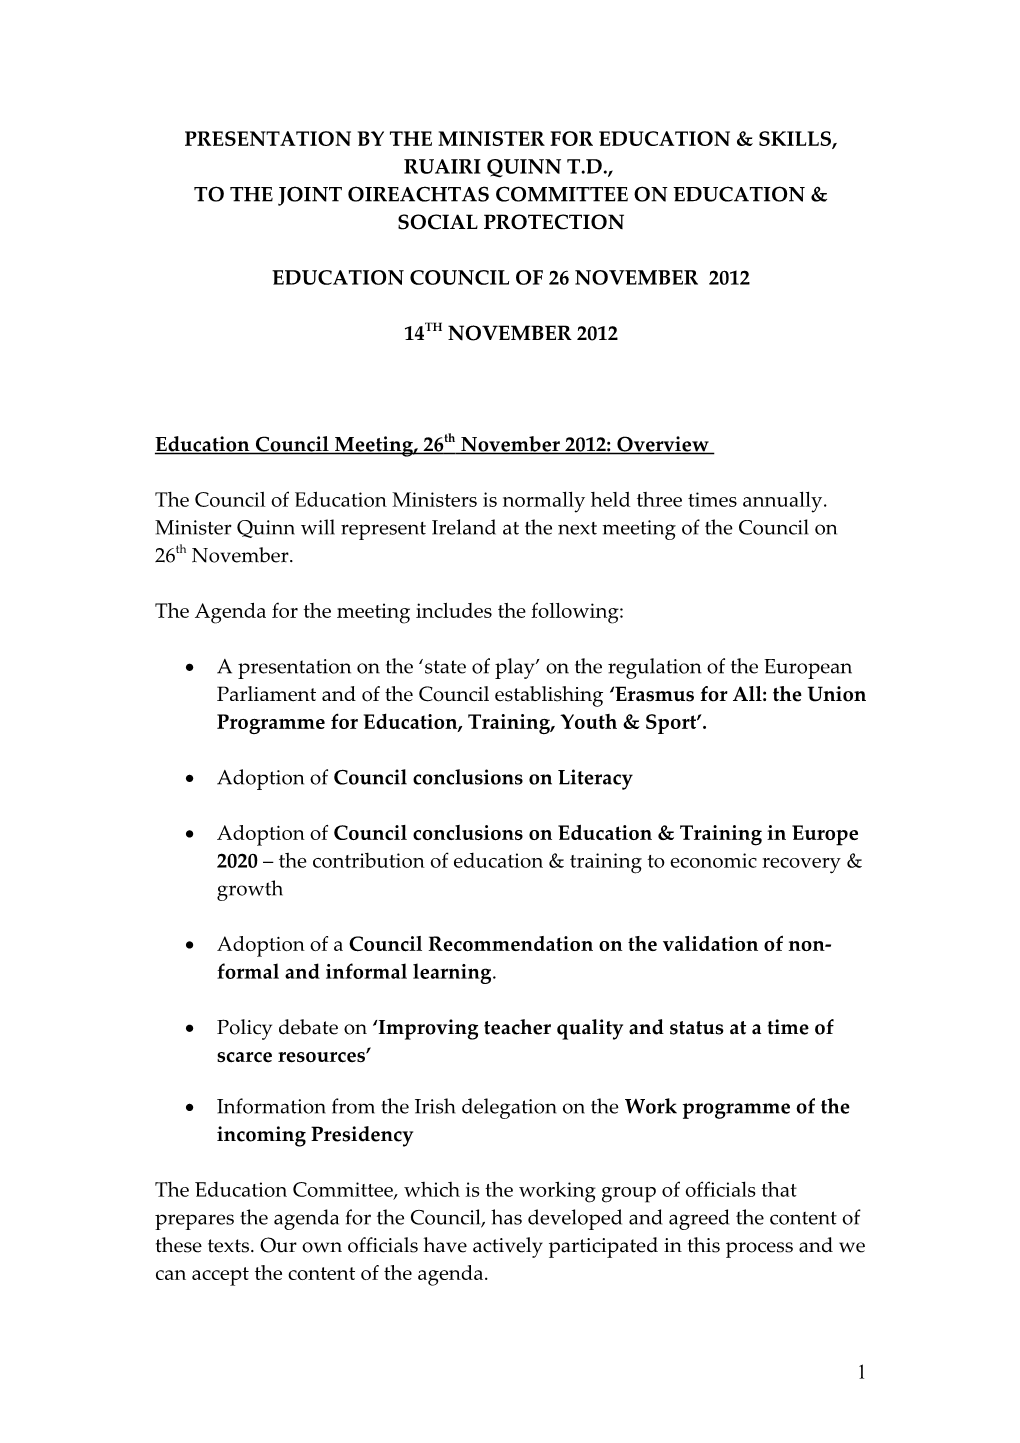 Four Items Will Be Agreed by Ministers for Education at the Council of Education Ministers